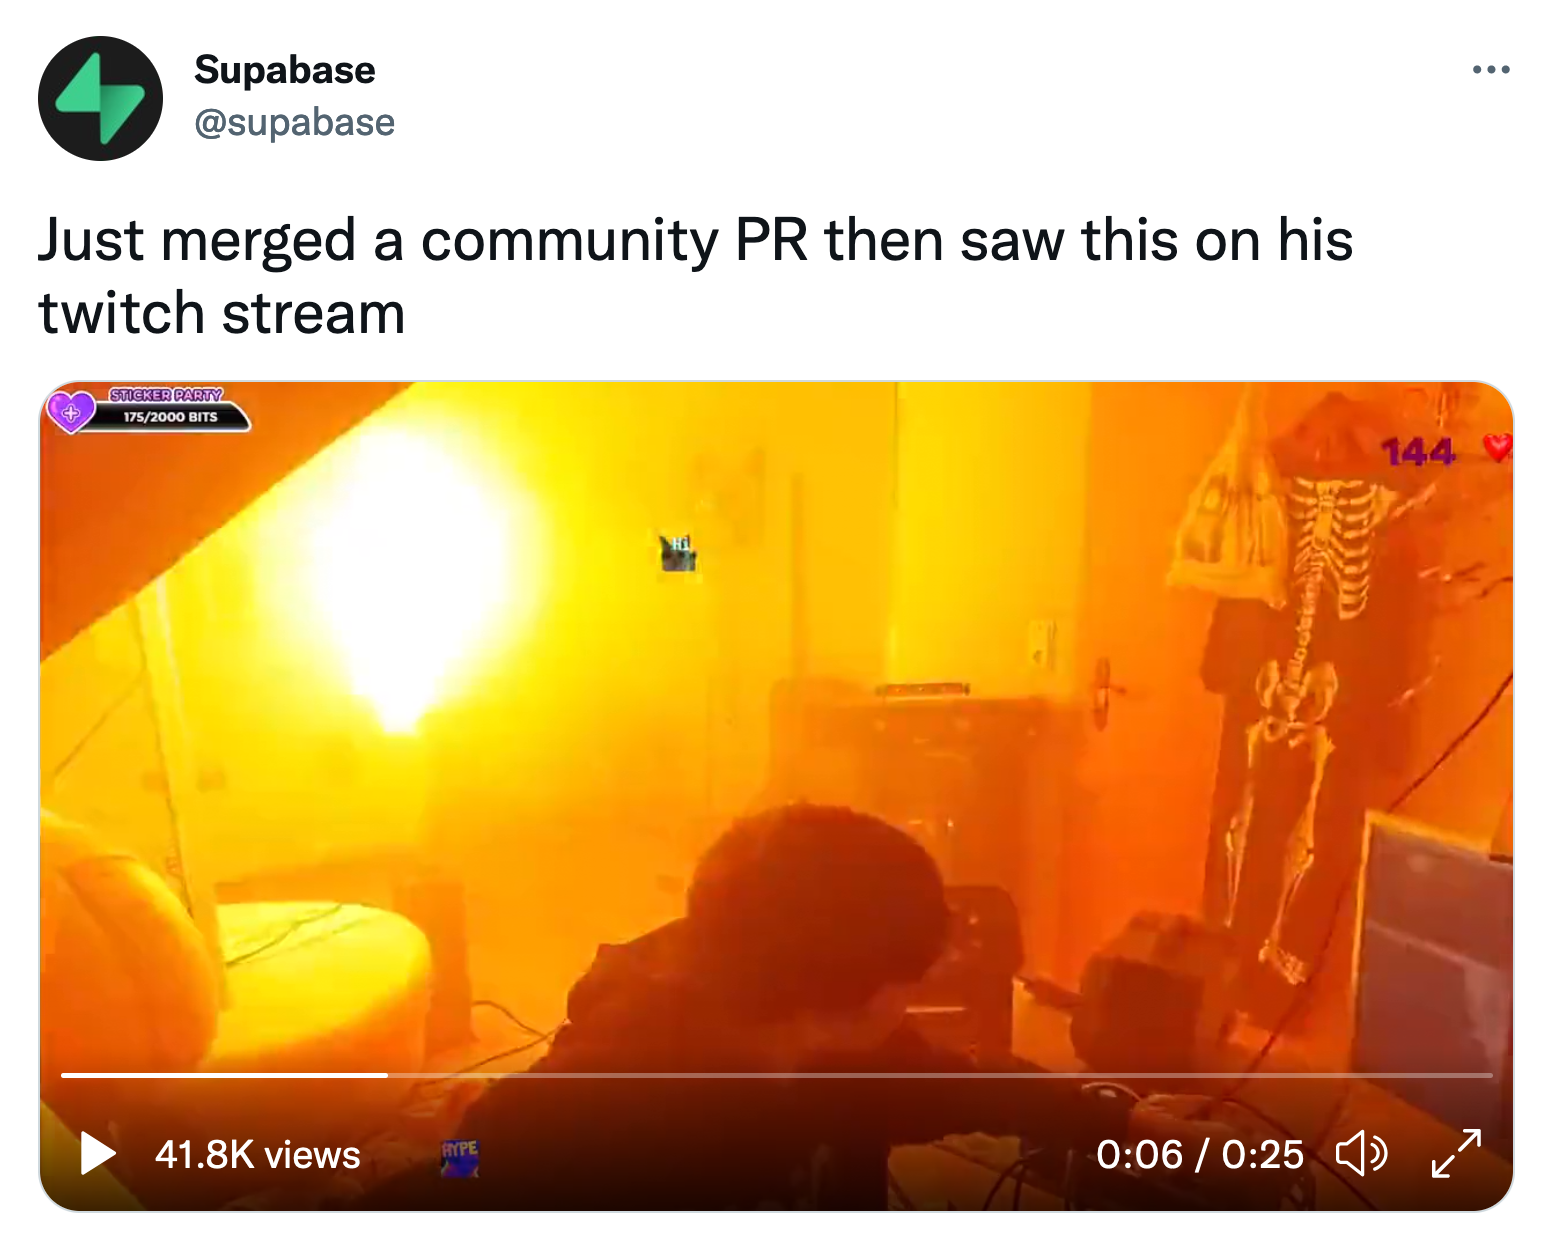 Tweet: "Just merged a community PR then saw this on his twitch stream" including a video with a kid having fire in the background.